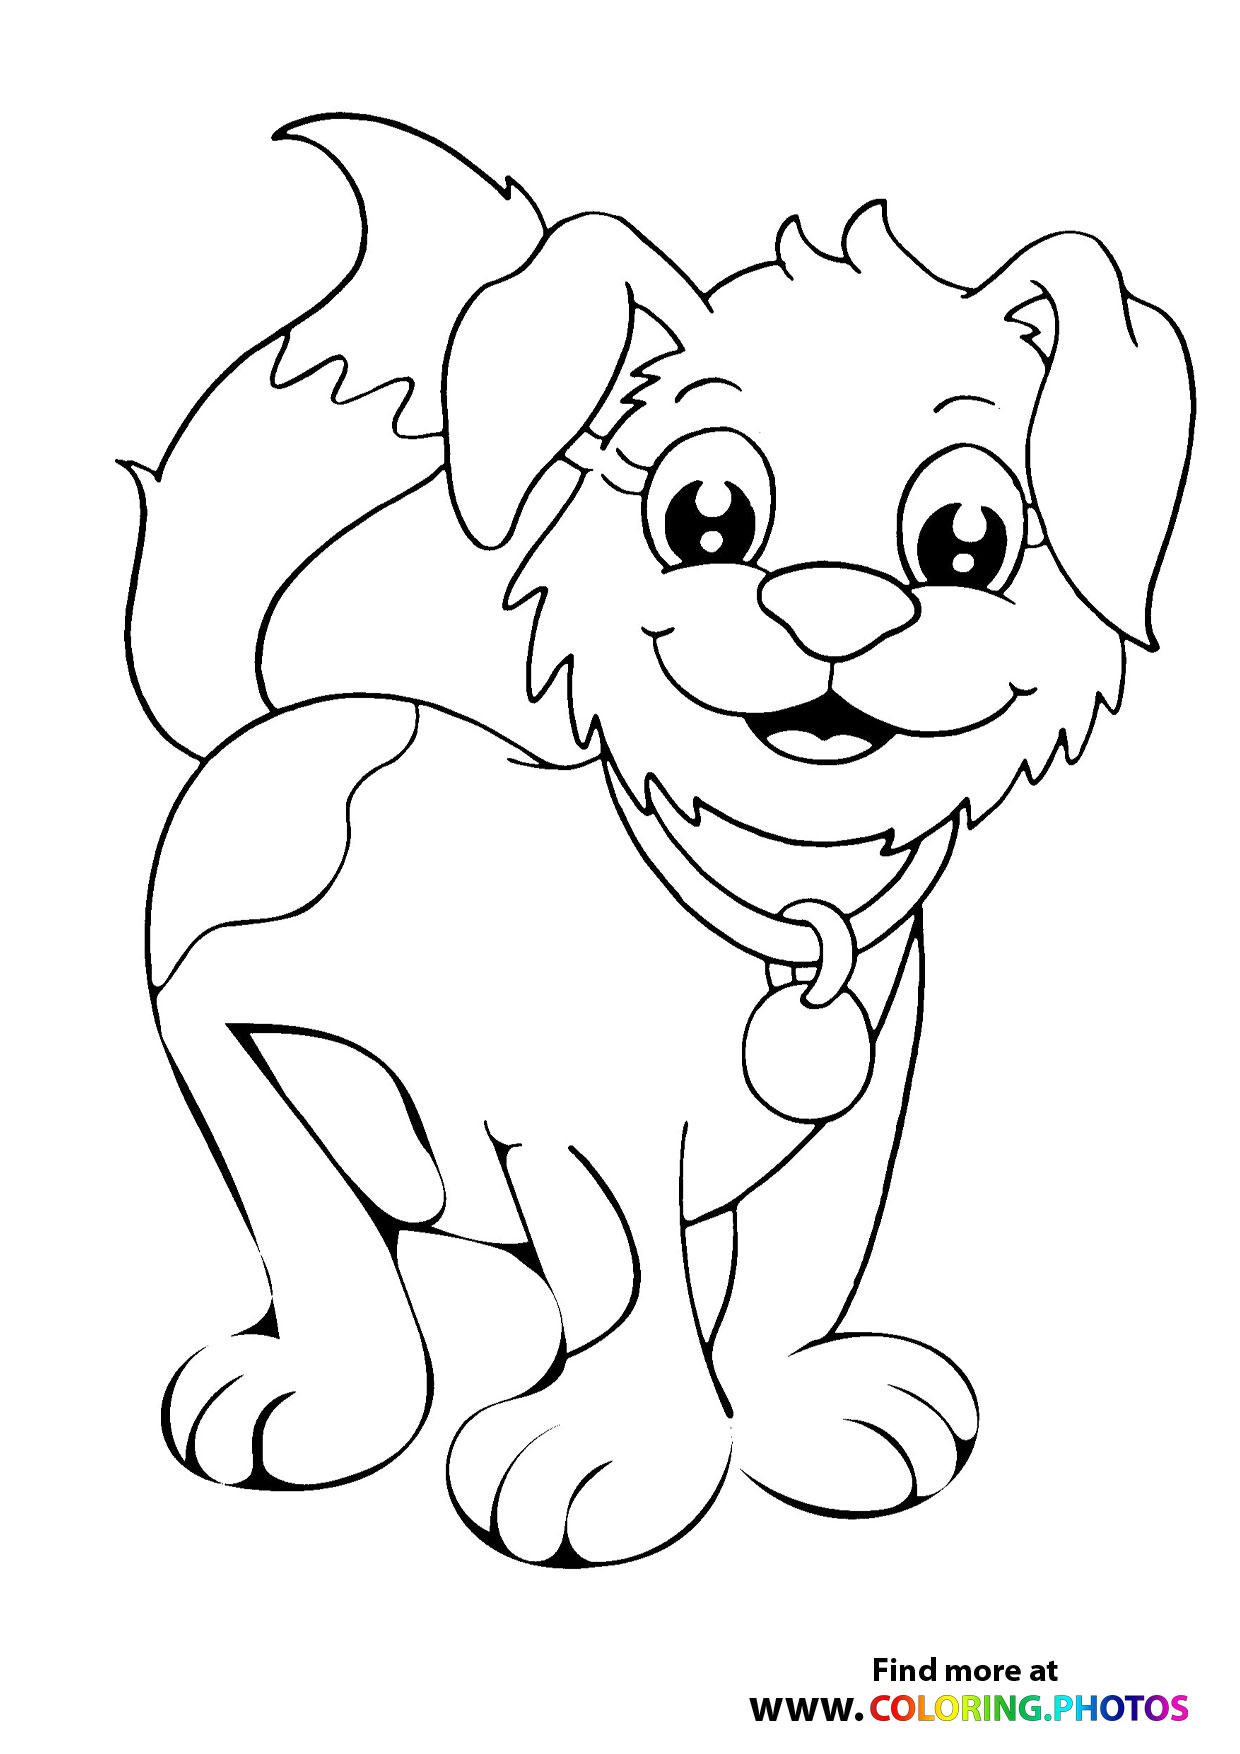 Dog with a collar - Coloring Pages for kids